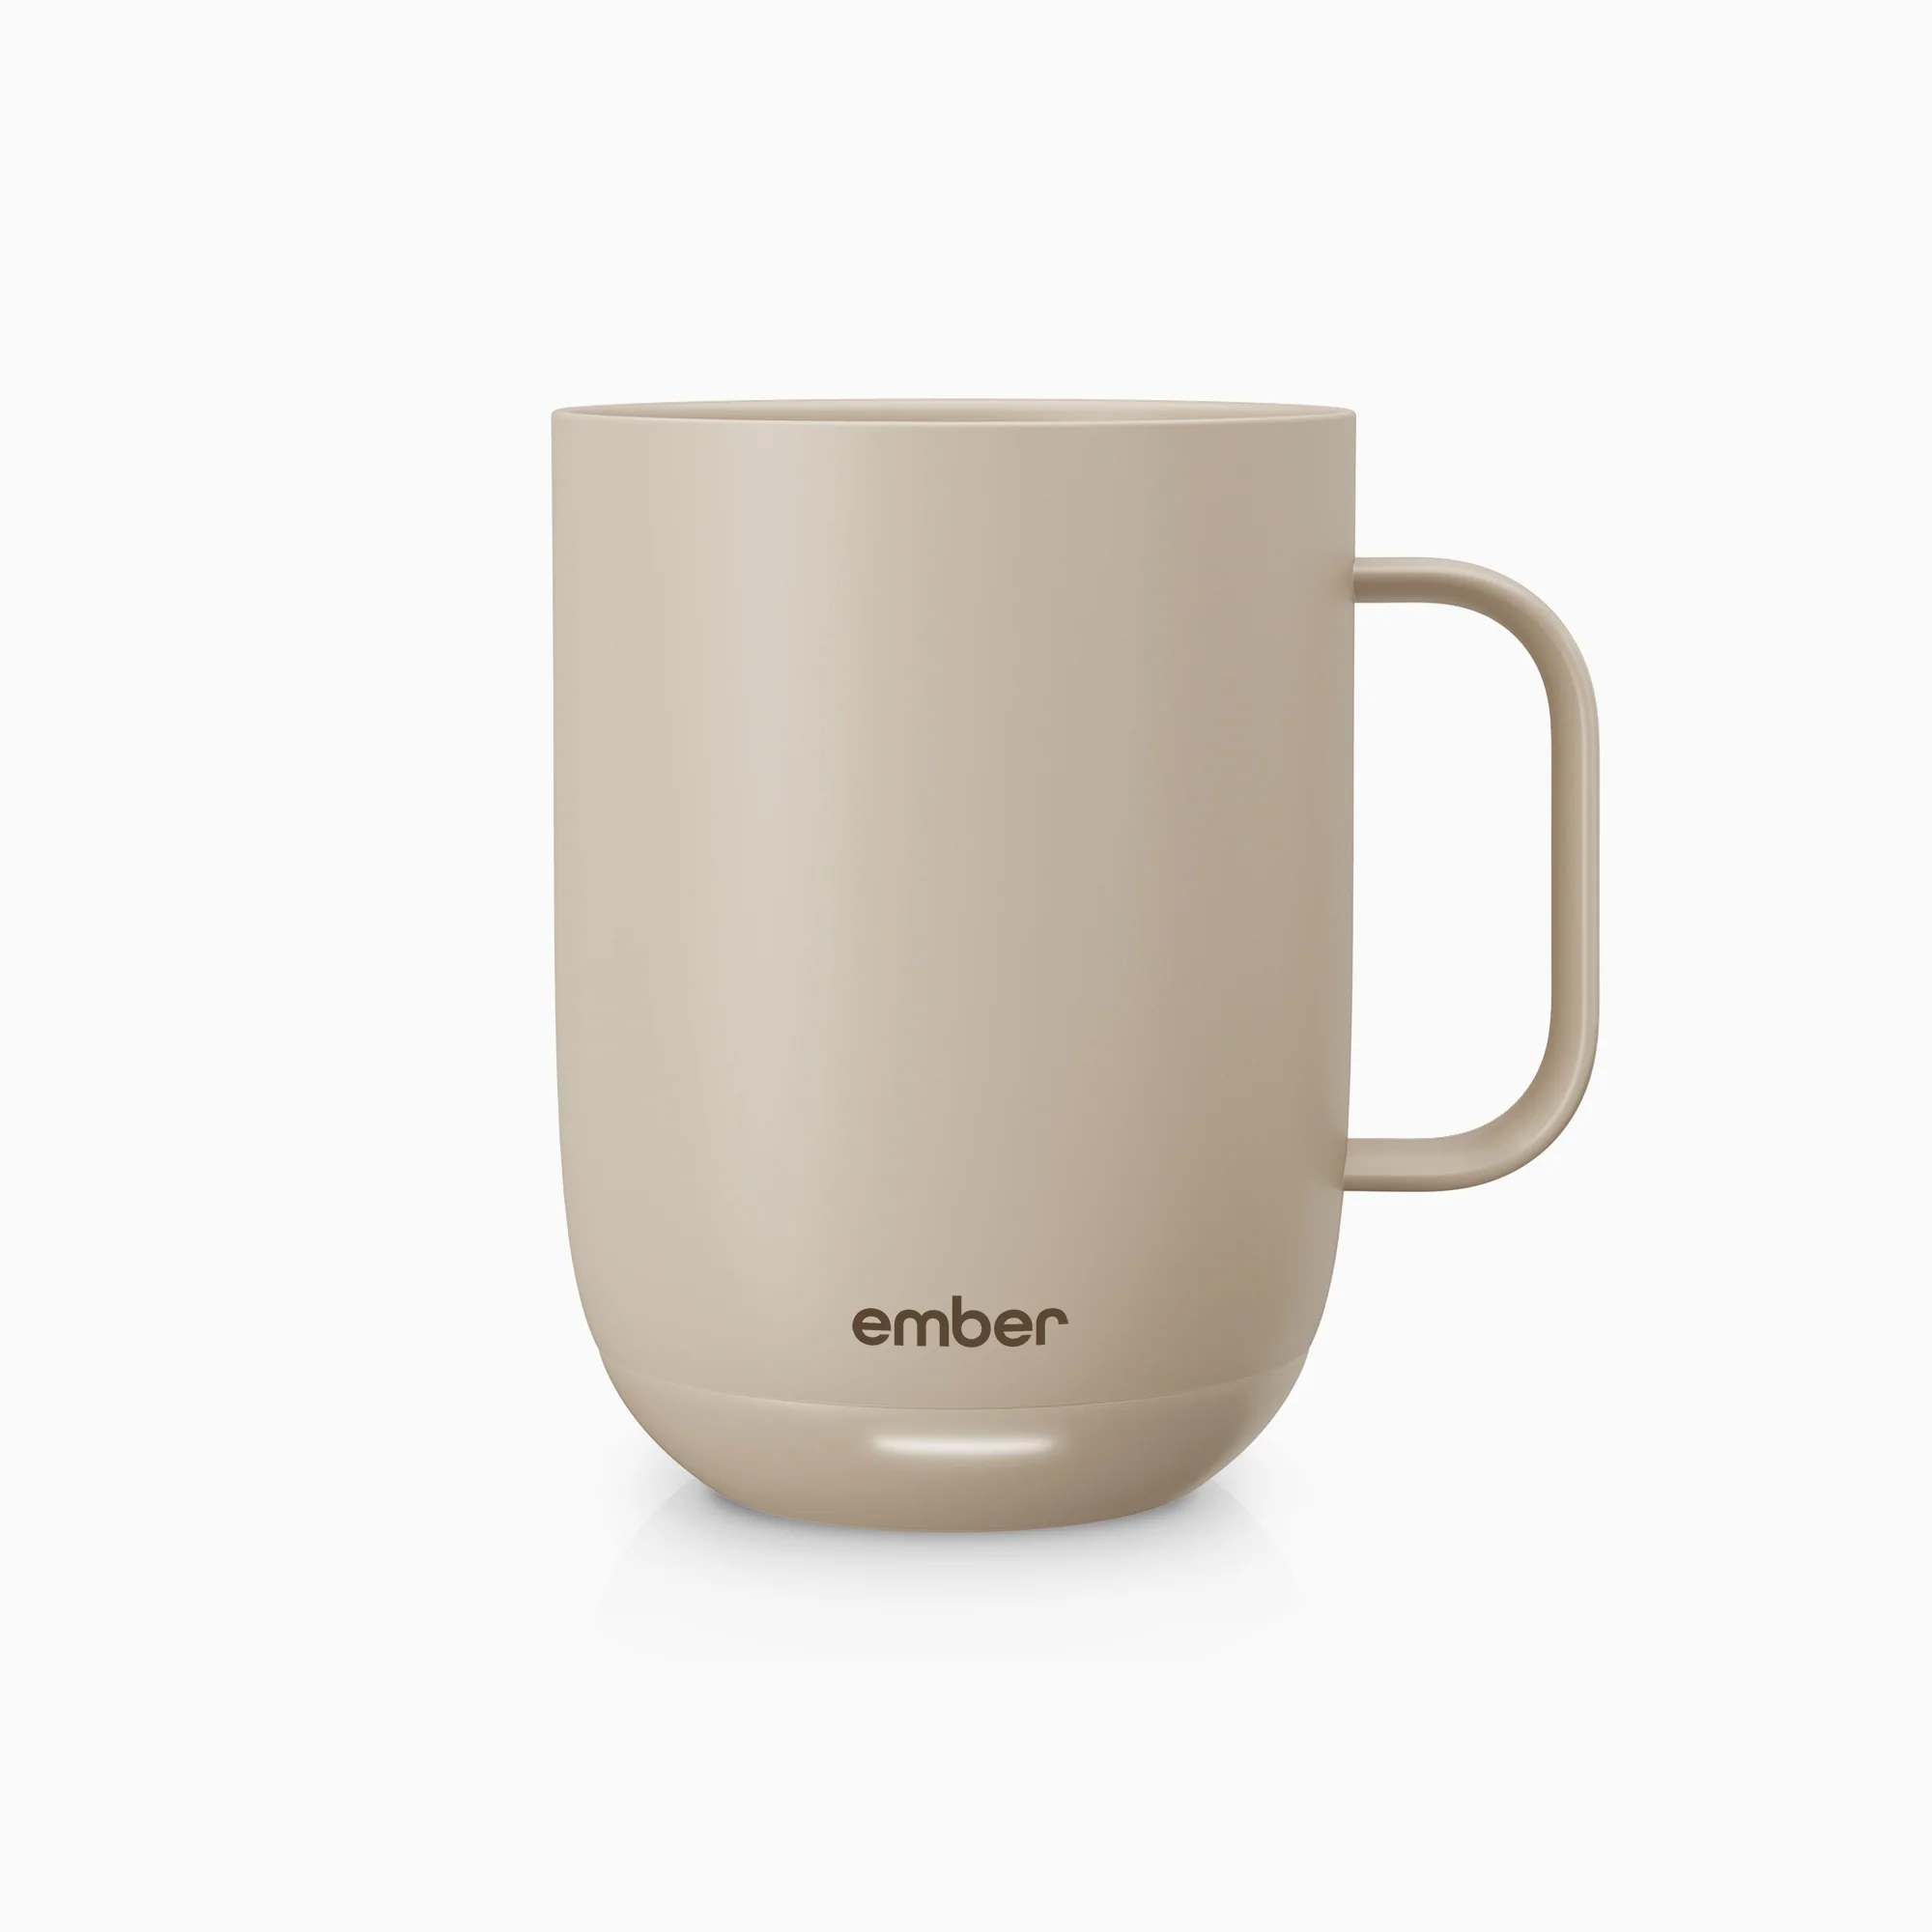 Ember Mug 2 Unboxing Set Up, and Review